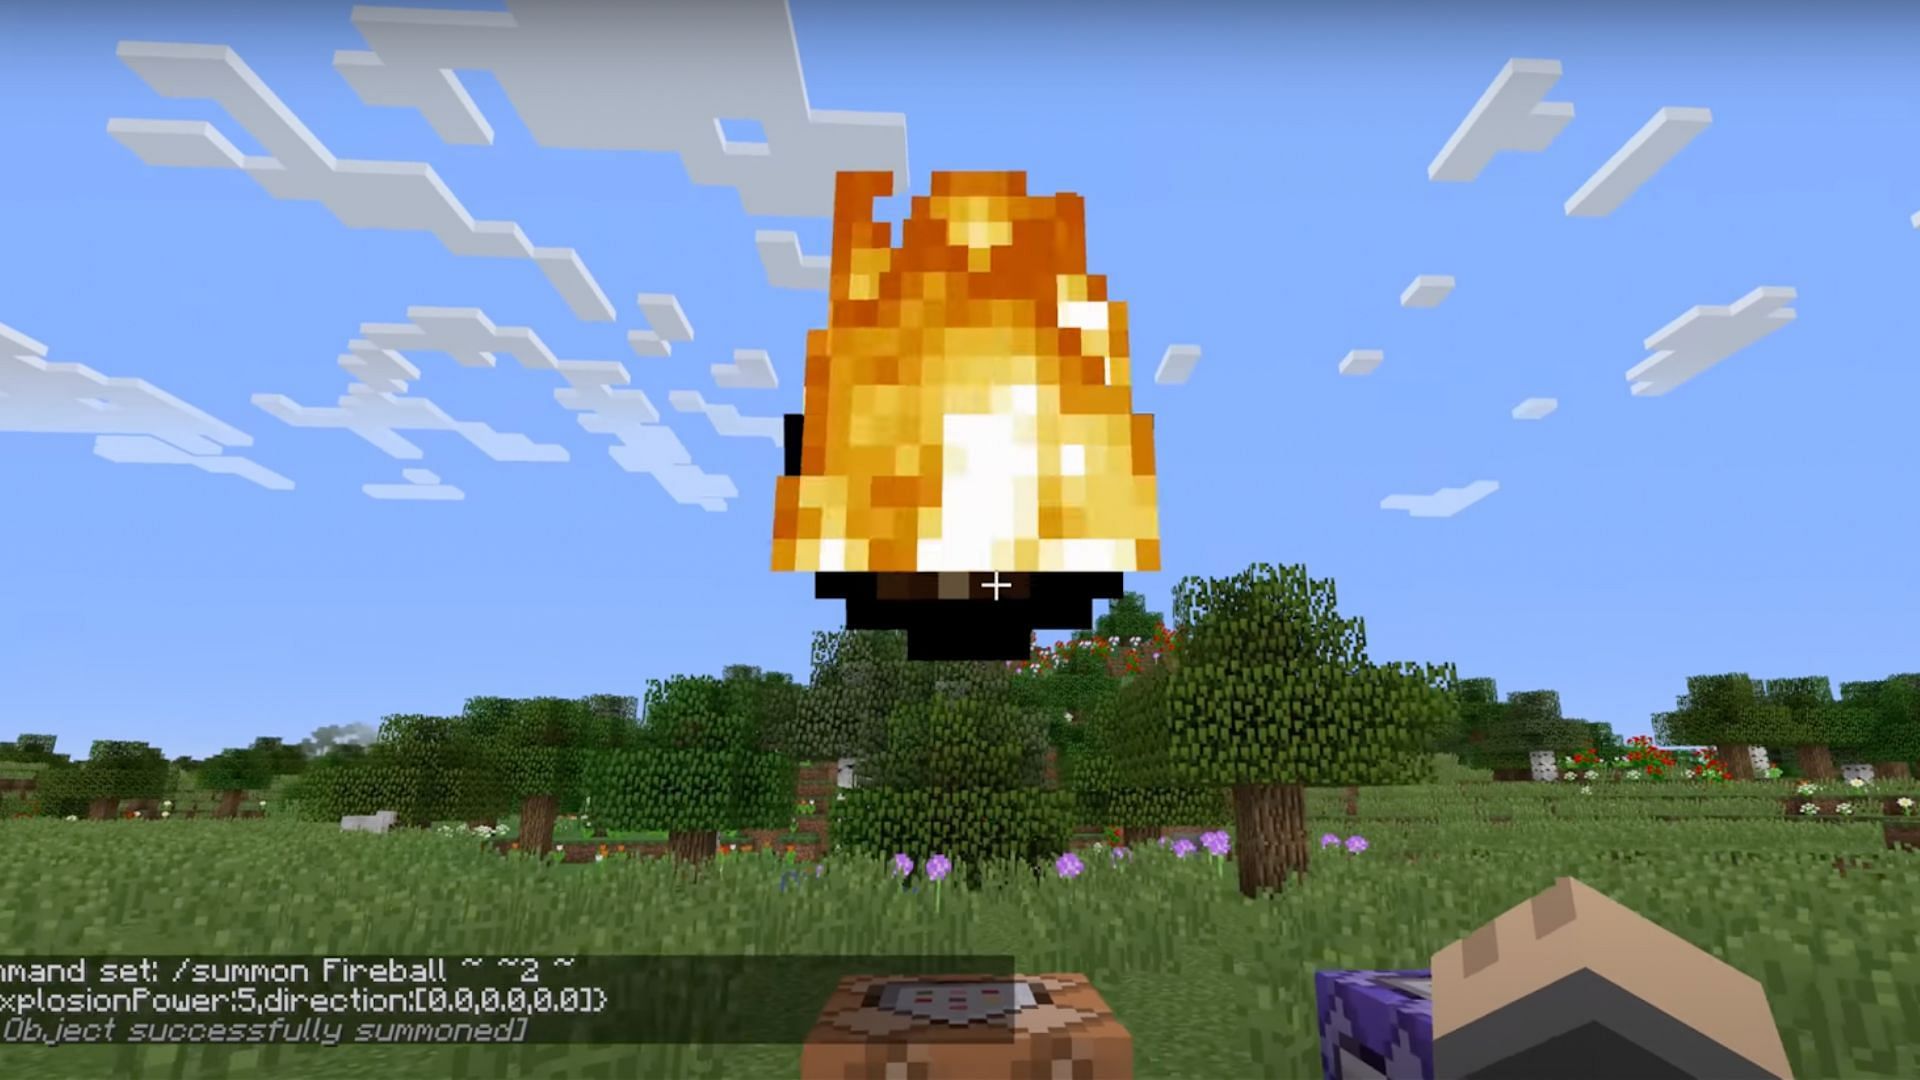 Fireball is an explosive projectile that ghasts shoot in Minecraft (Image via Mojang)